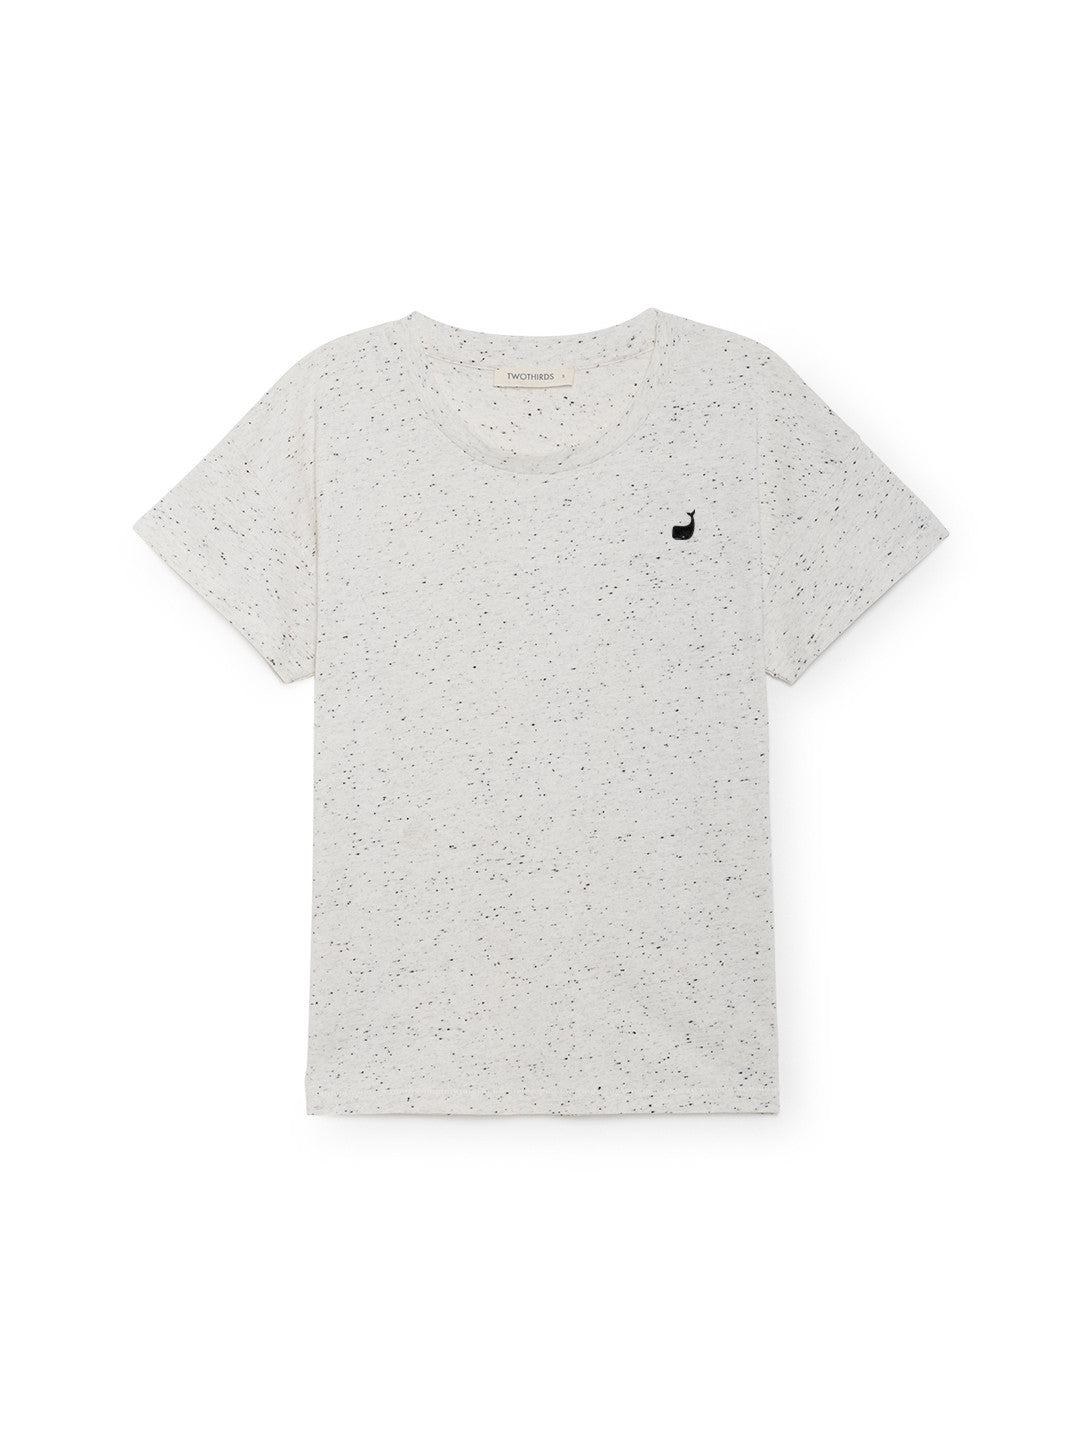 TWOTHIRDS Womens Tee: Sepanggar - White front